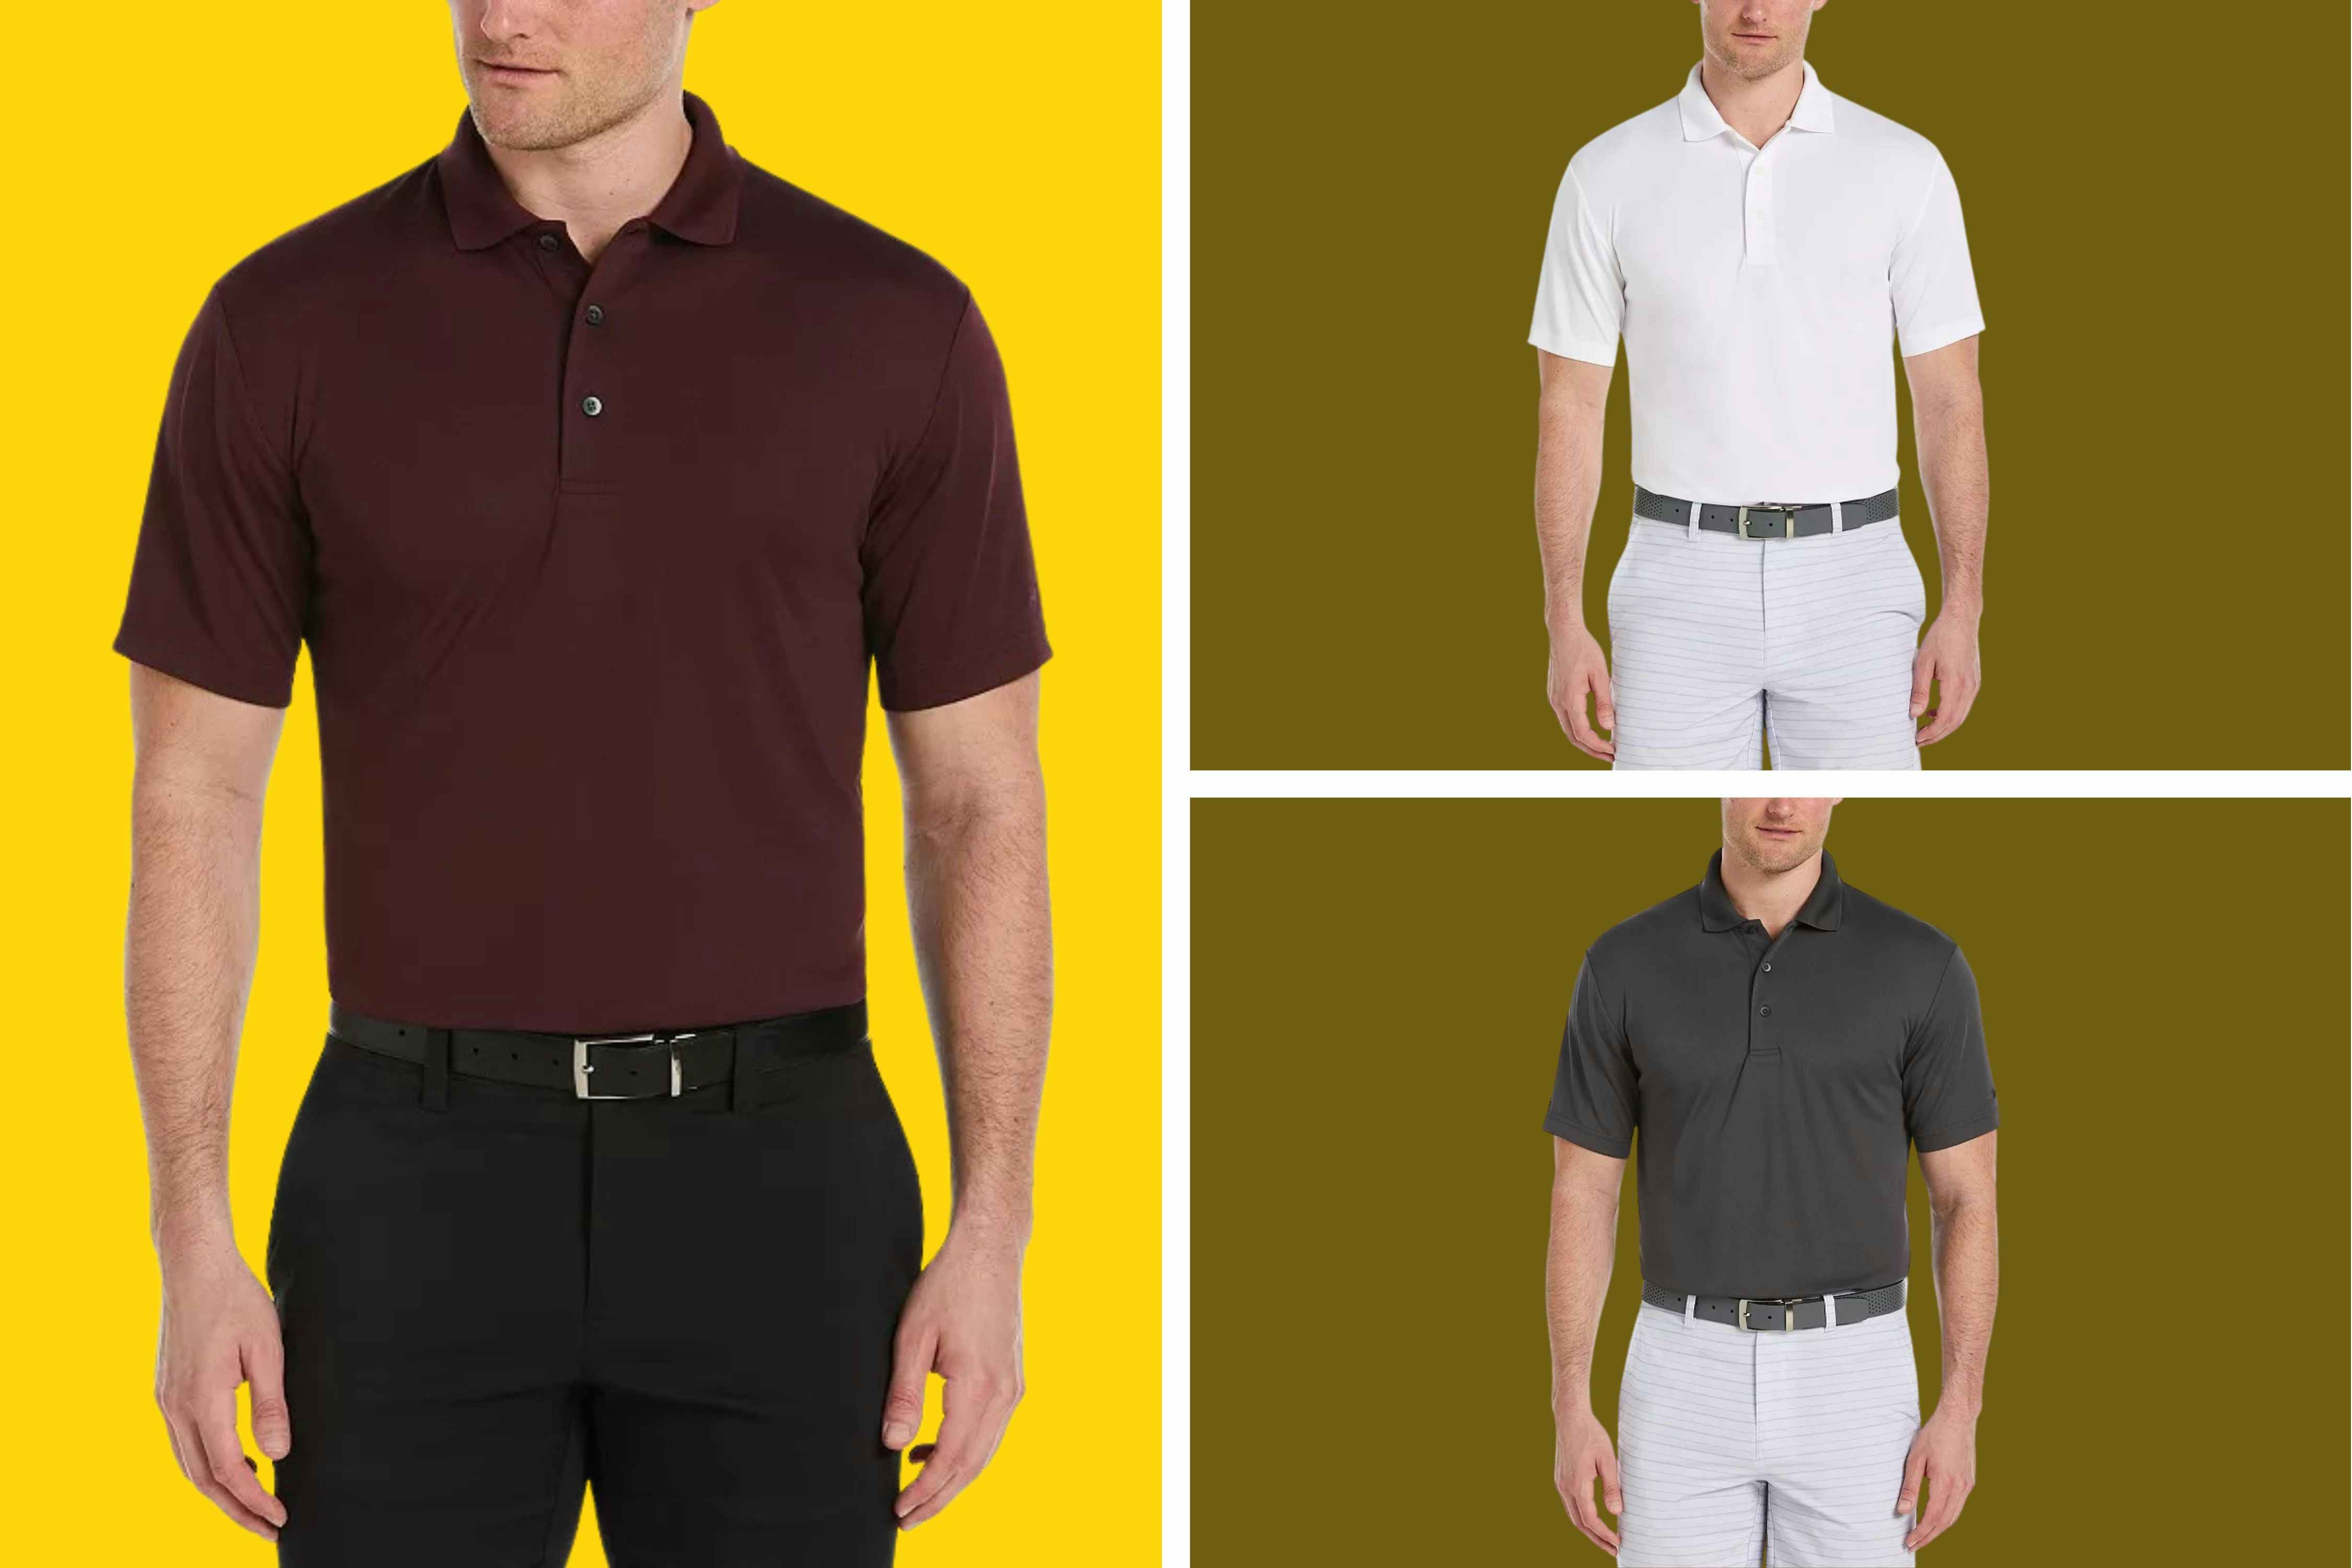 These Men's Polos Are Less Than $10 at Kohl's — 6 Colors Available